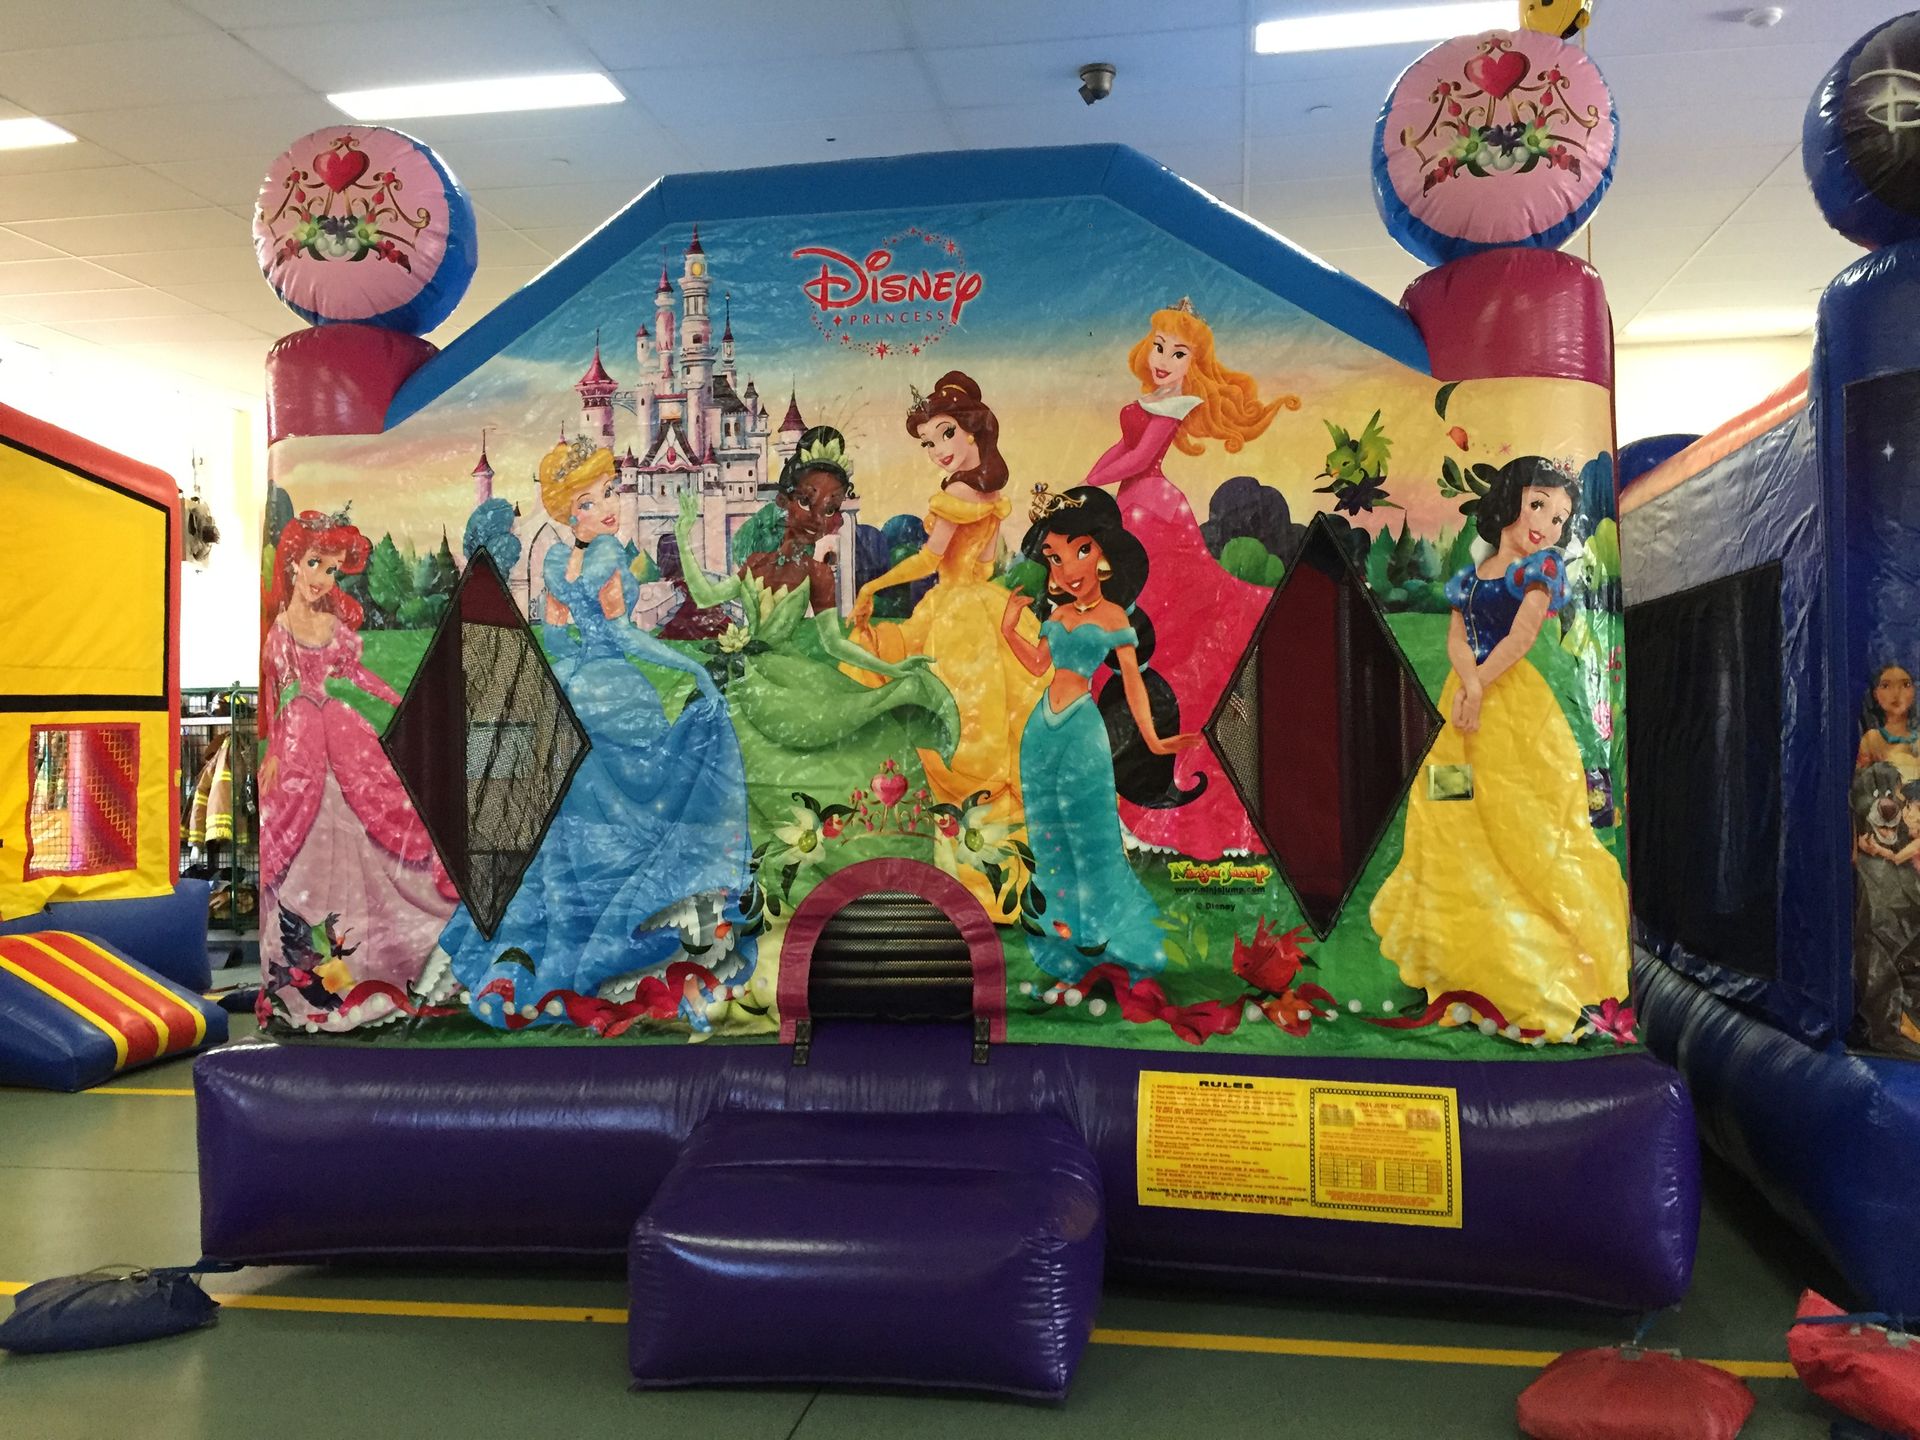 Disney Character Bounce House Inflatable 15' x 15' .  This is amazing fun for all ages, with Snow White, Jasmine, Tiana, Belle, Cinderella, Ariel, Tiana the princesses are all here for a day of fun.